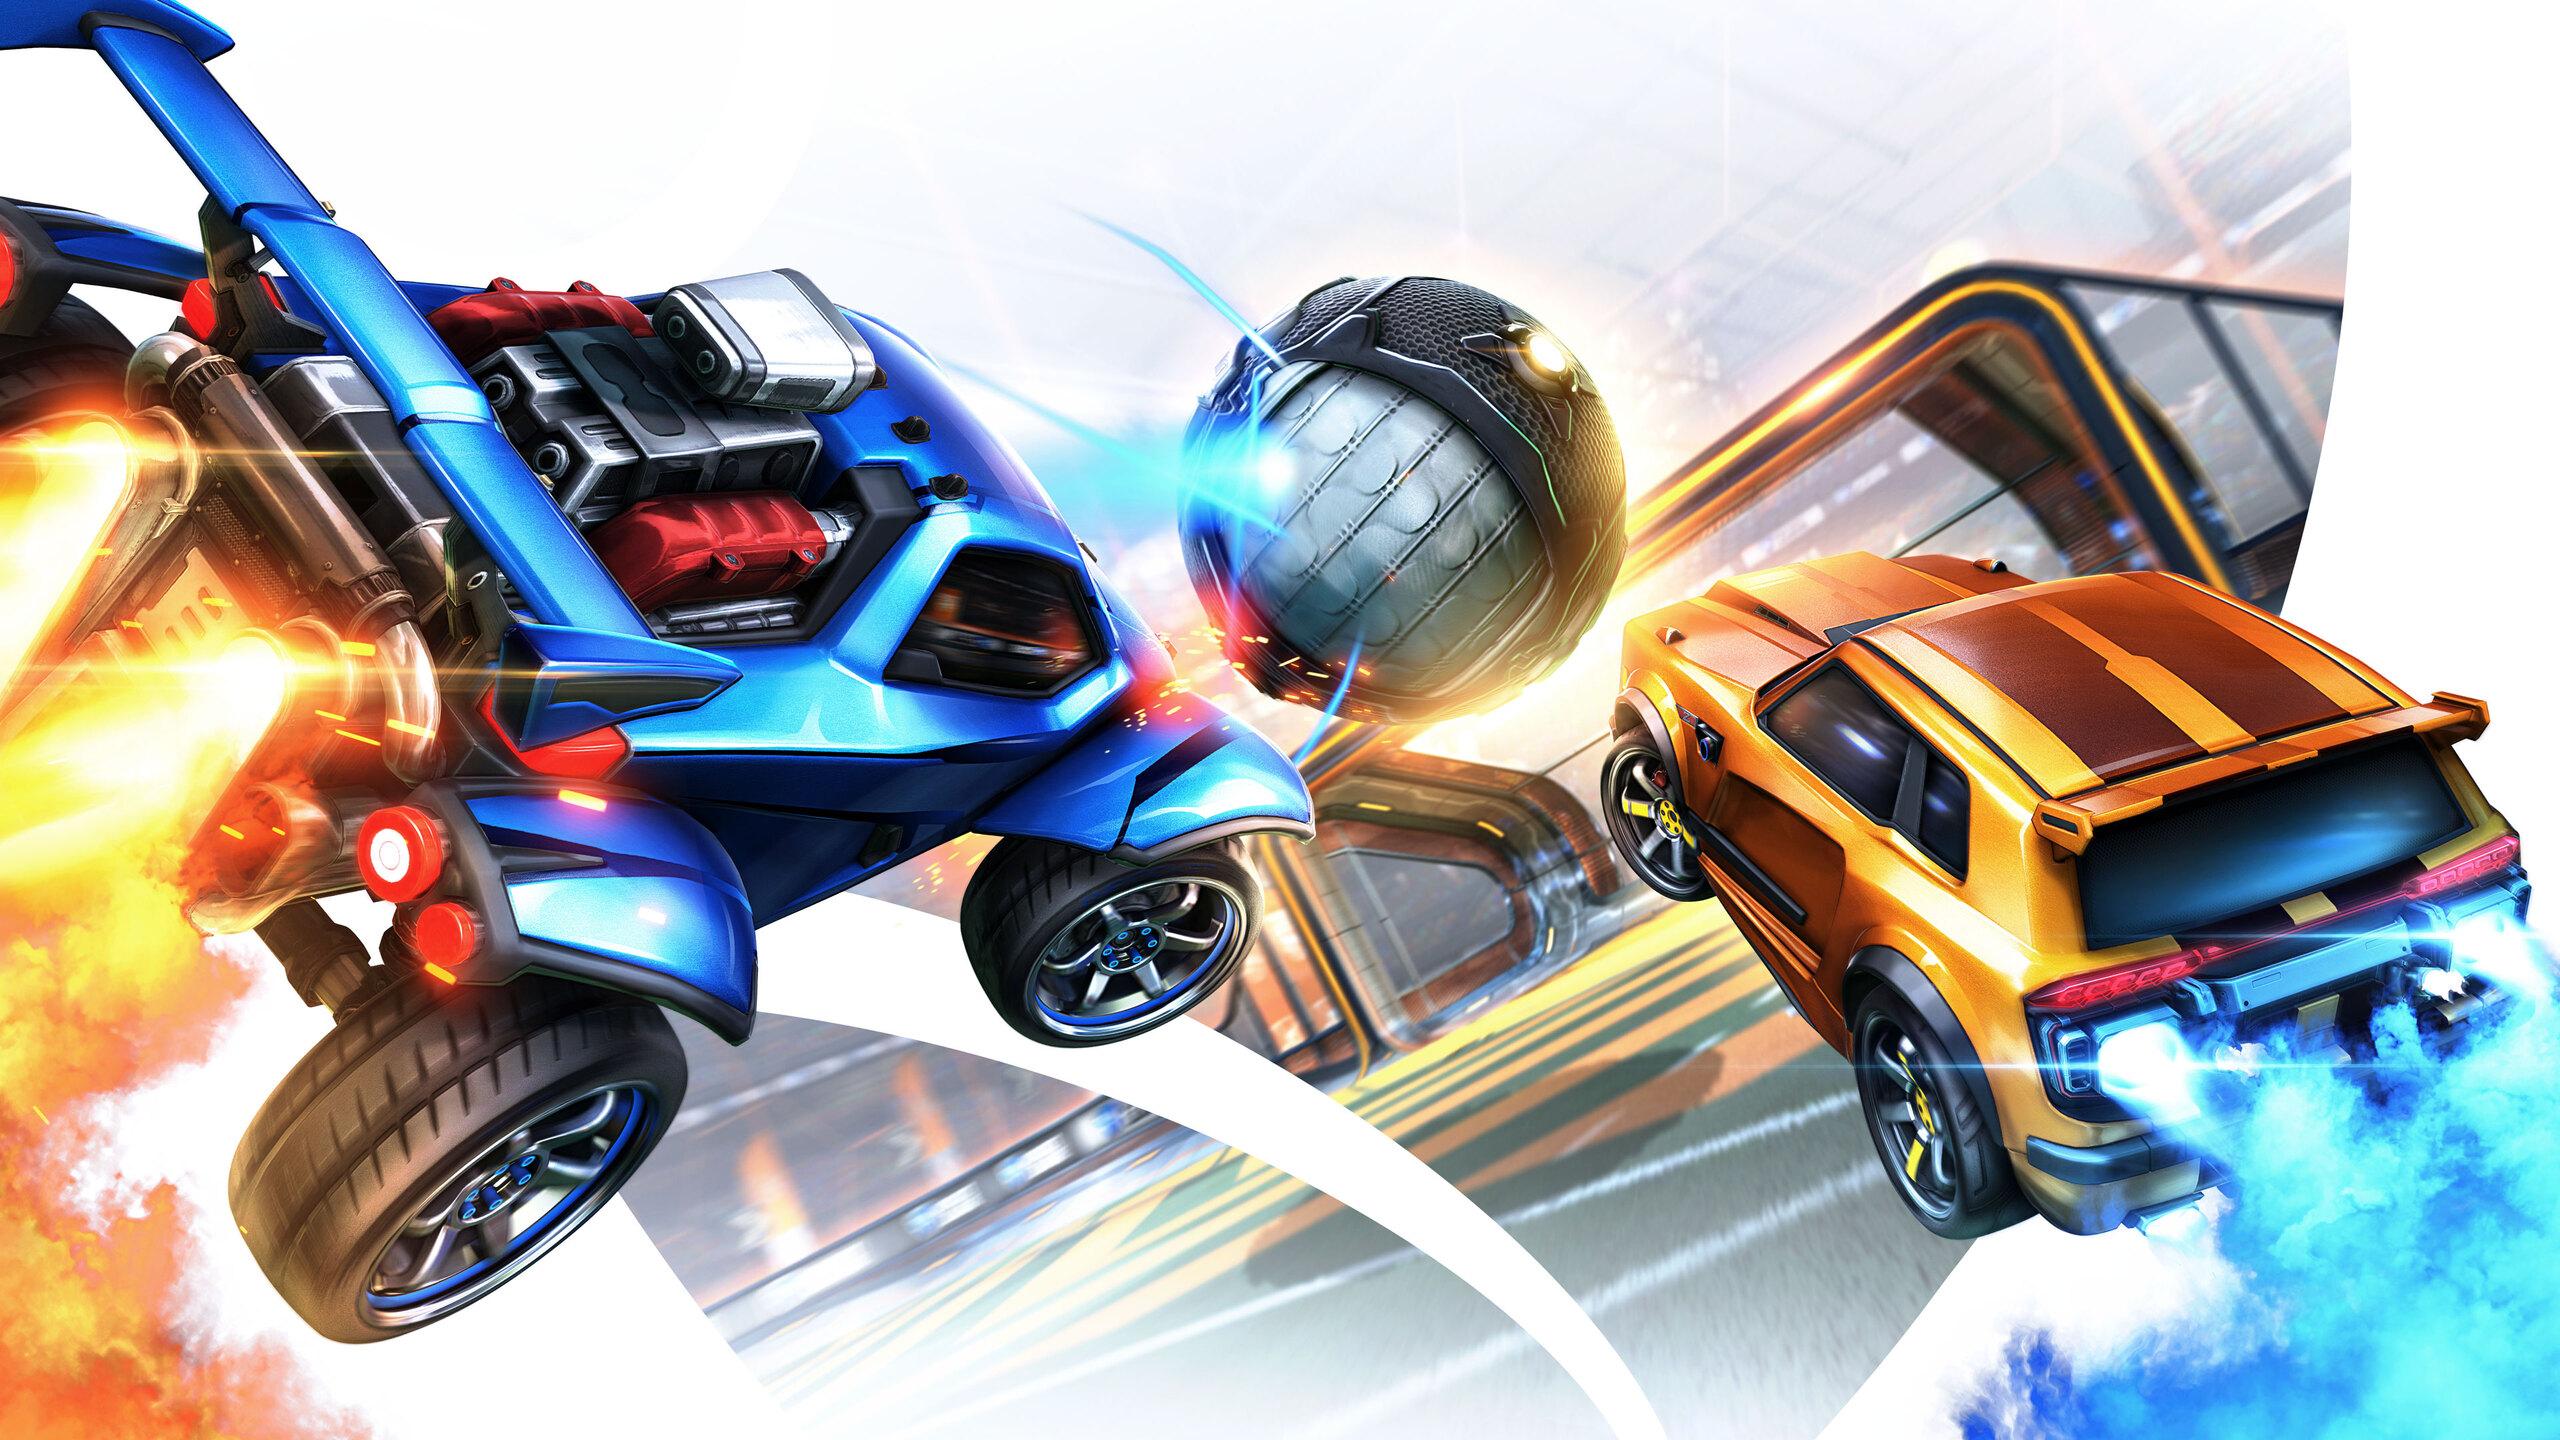 Rocket League 1440P Wallpapers Wallpaper 1 Source For Free Awesome